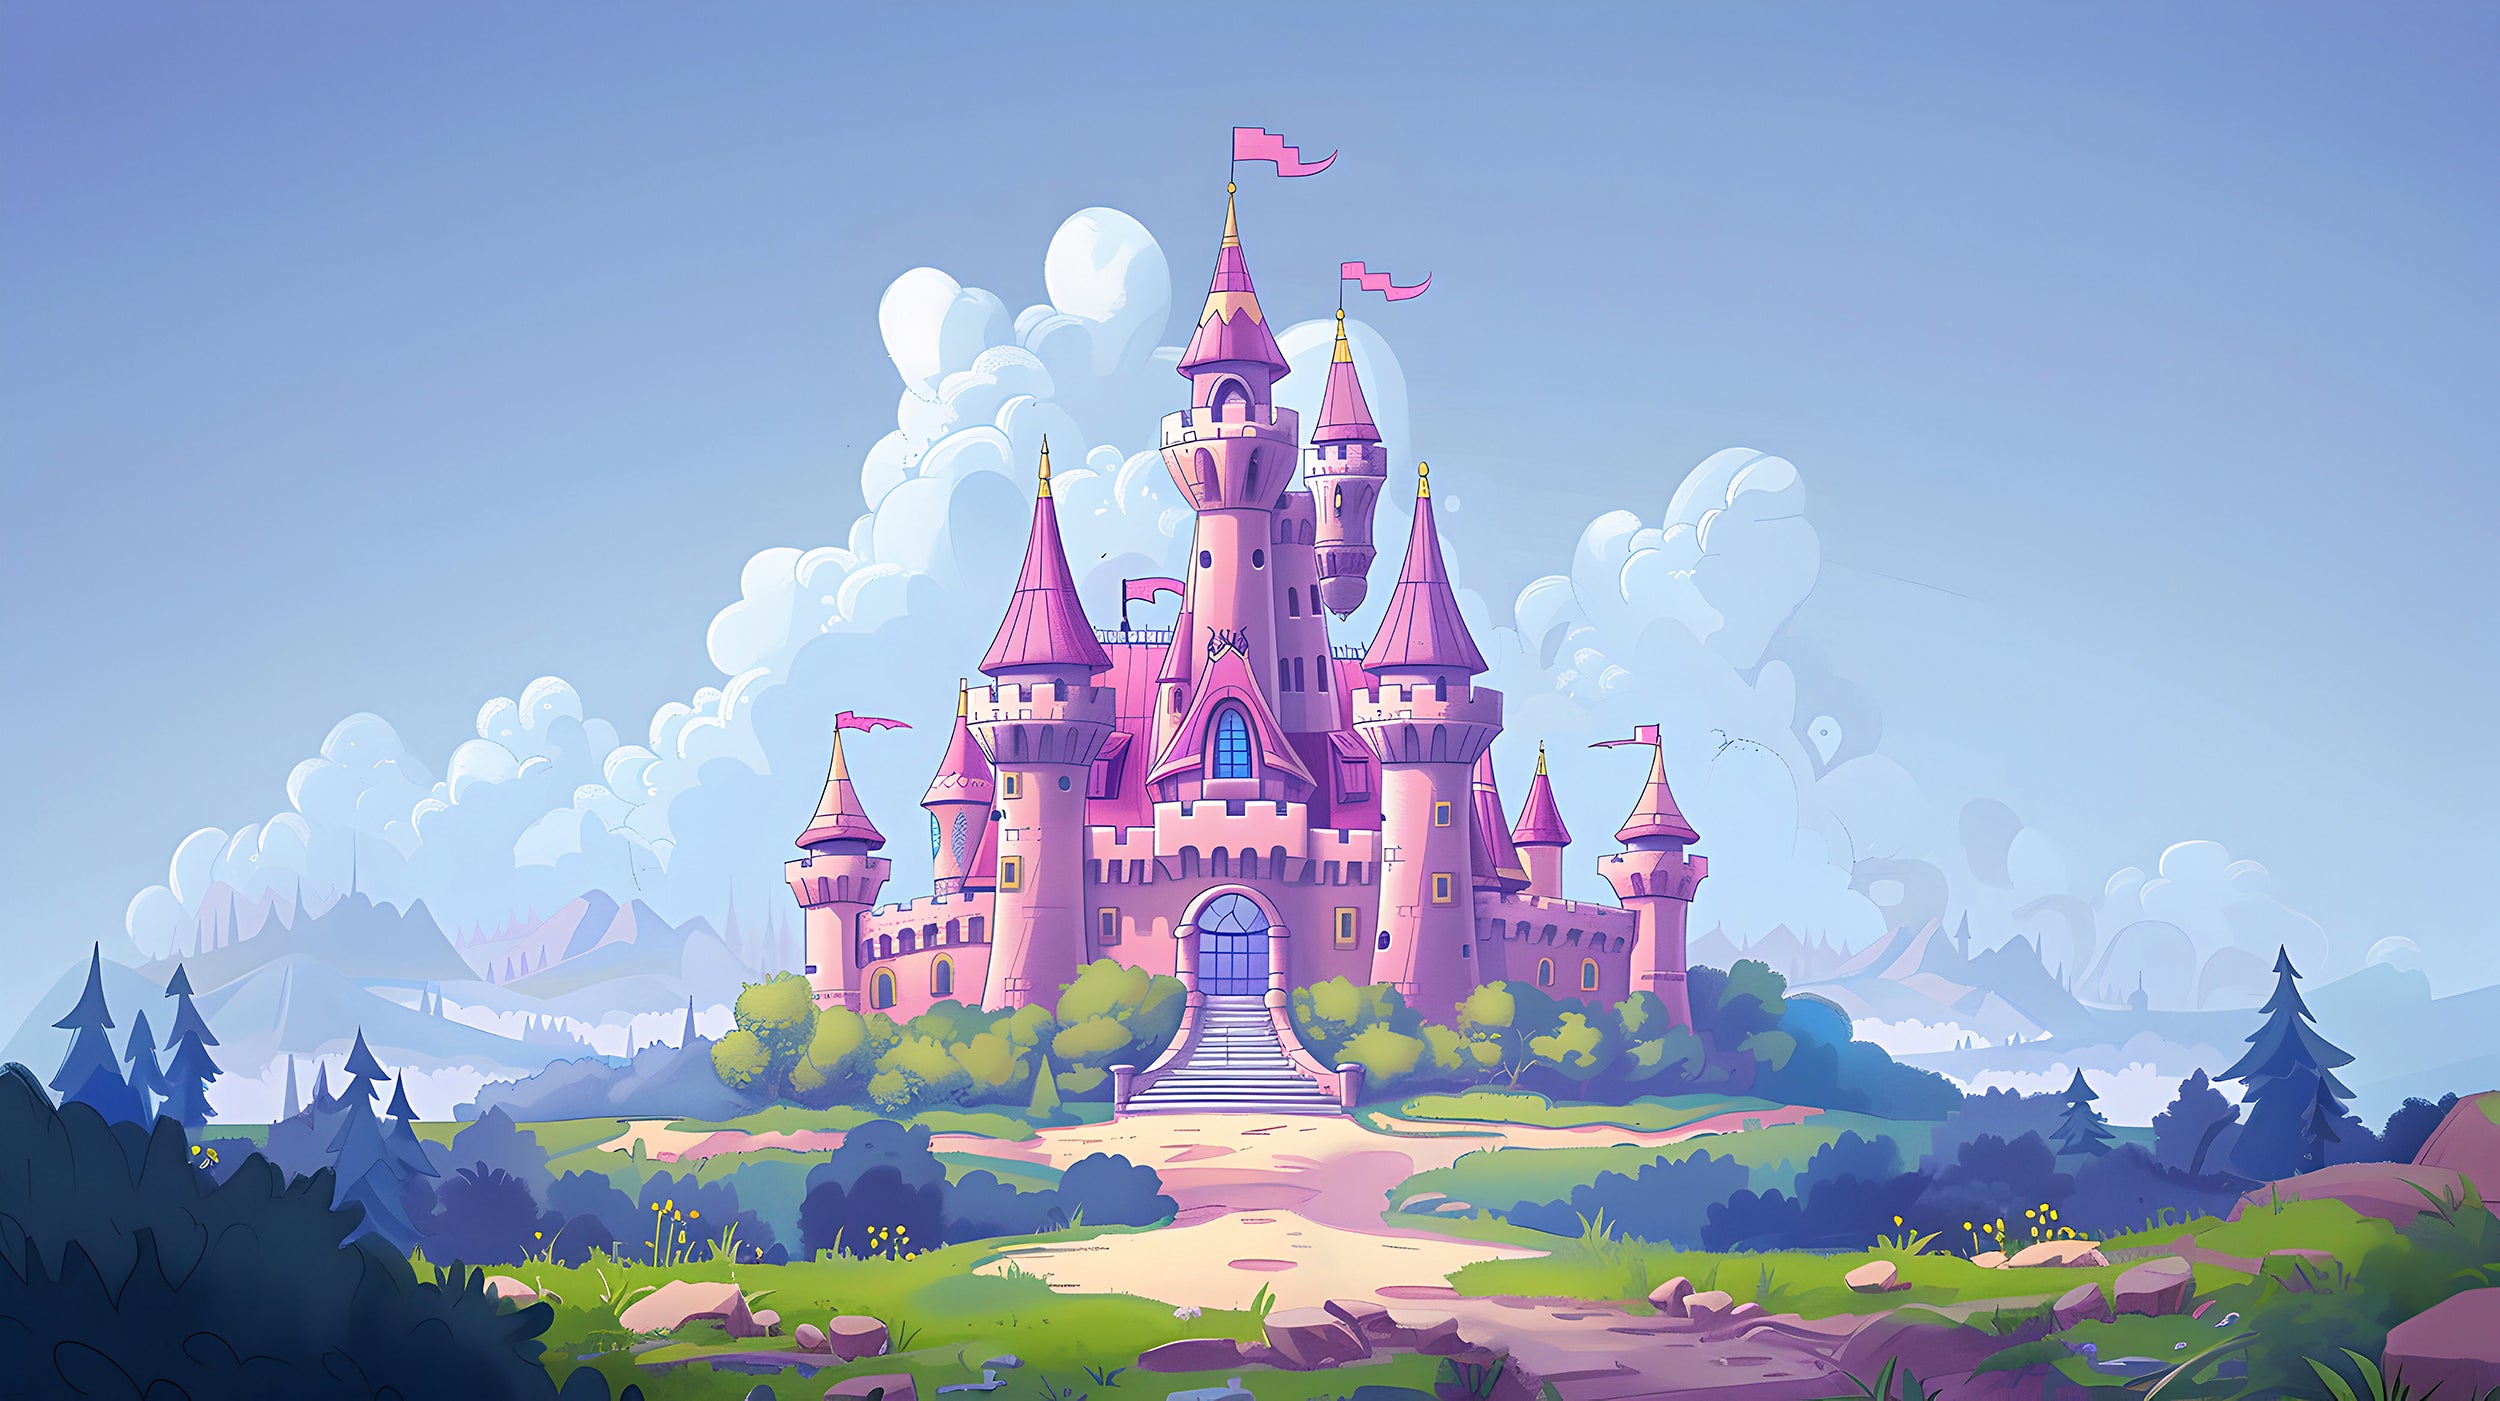 Pink Princess Castle Mural, Peel and Stick Nursery Dreamy Castle Wallpaper, Cartoon Style Kids Room Colorful Castle, PVC free Removable Decal